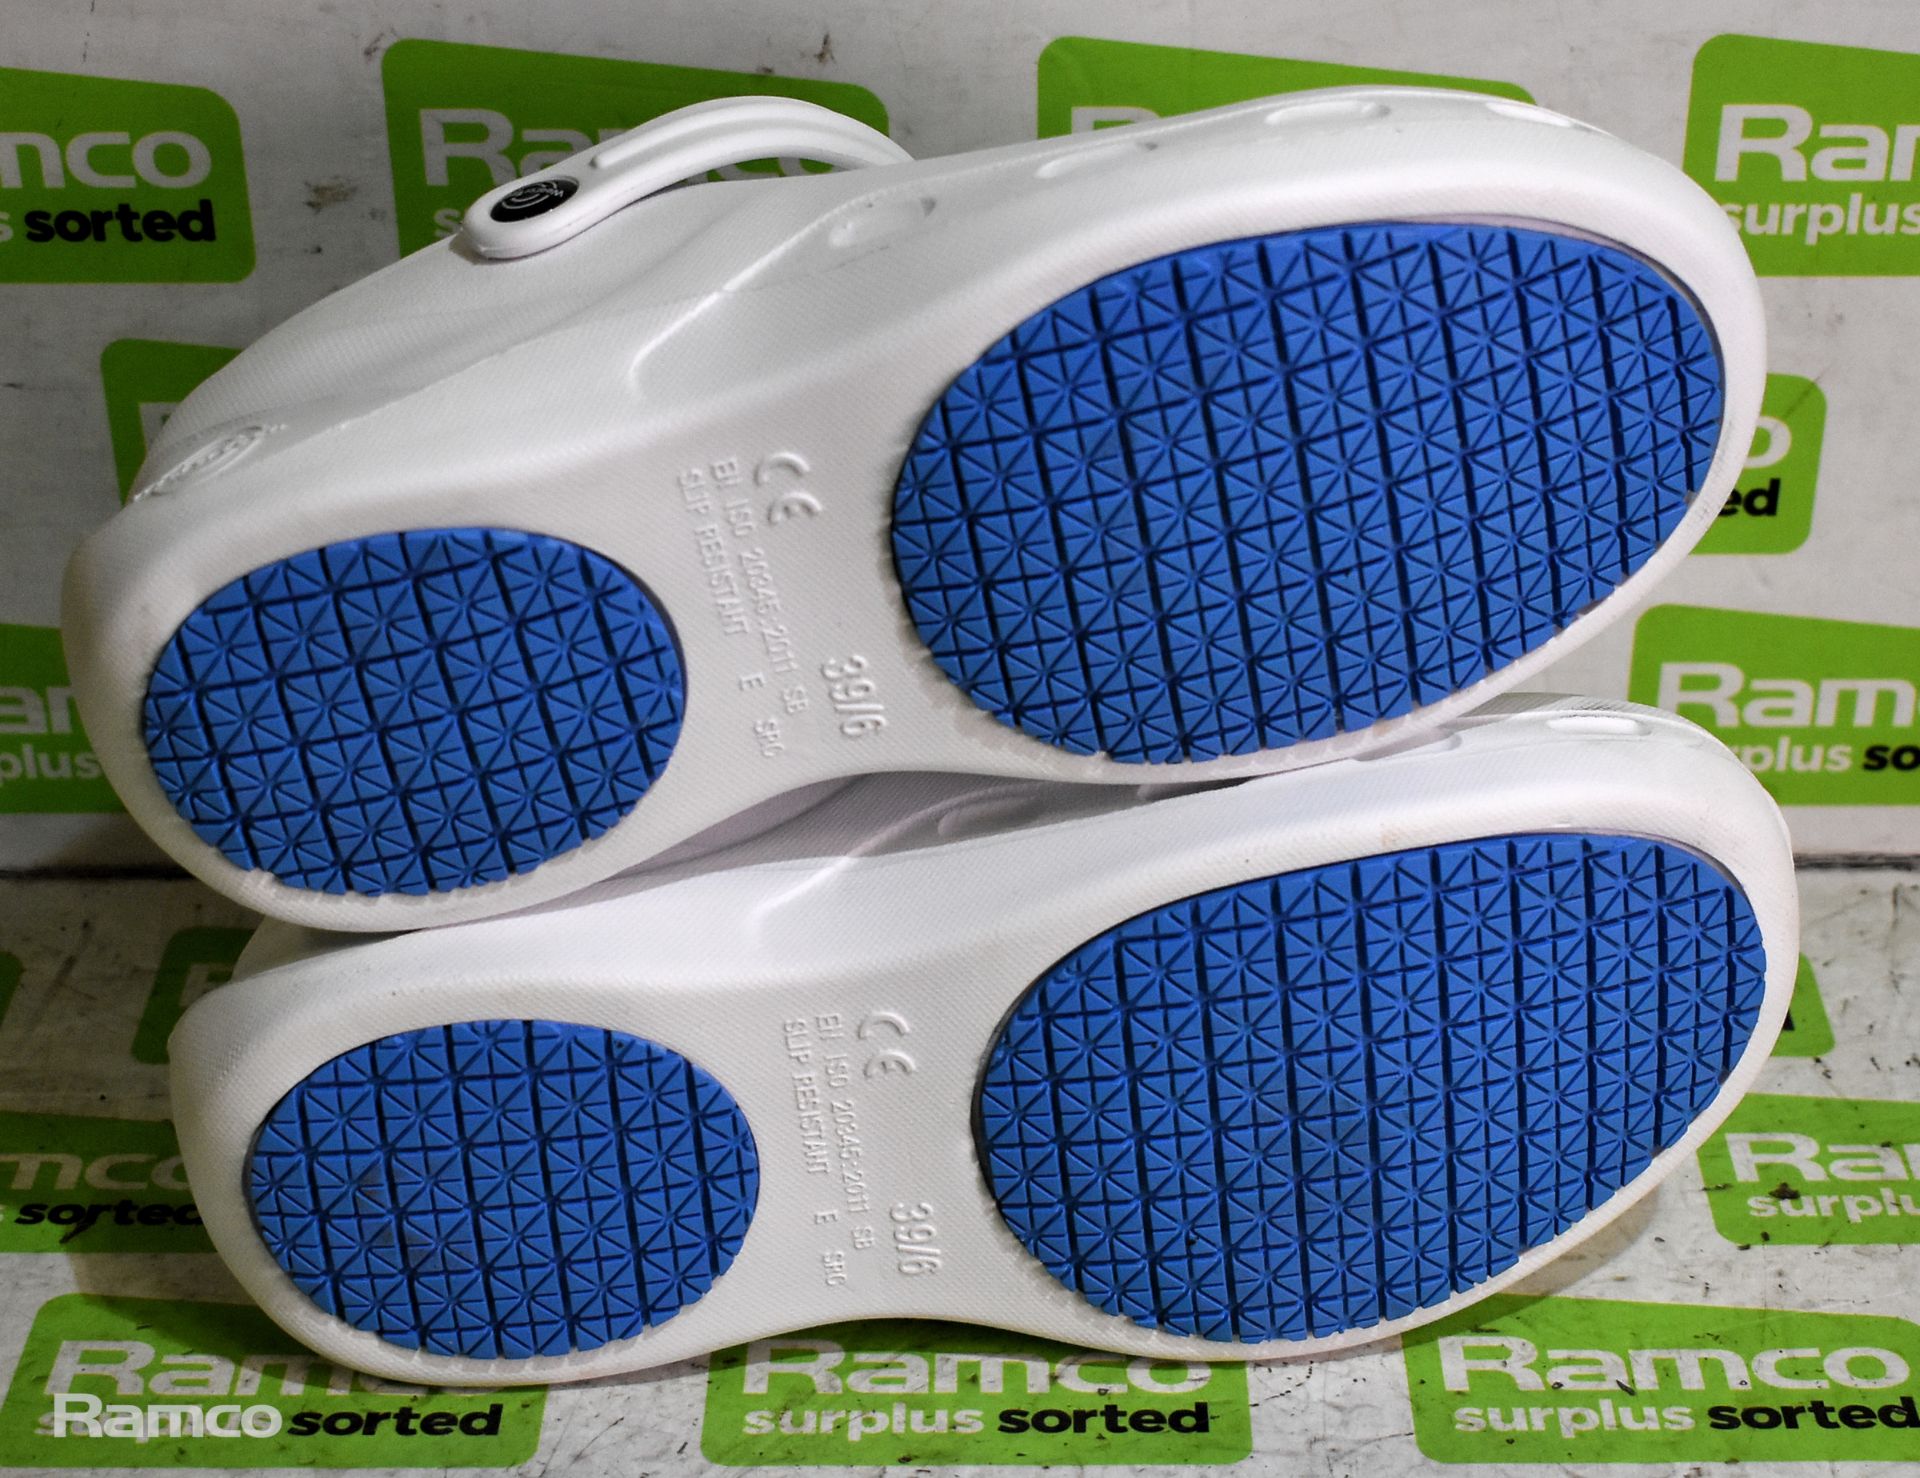 301W invigorate white shoe size 6, 2x pairs of Protect white angle cleanroom shoes - size 6 - Image 6 of 7